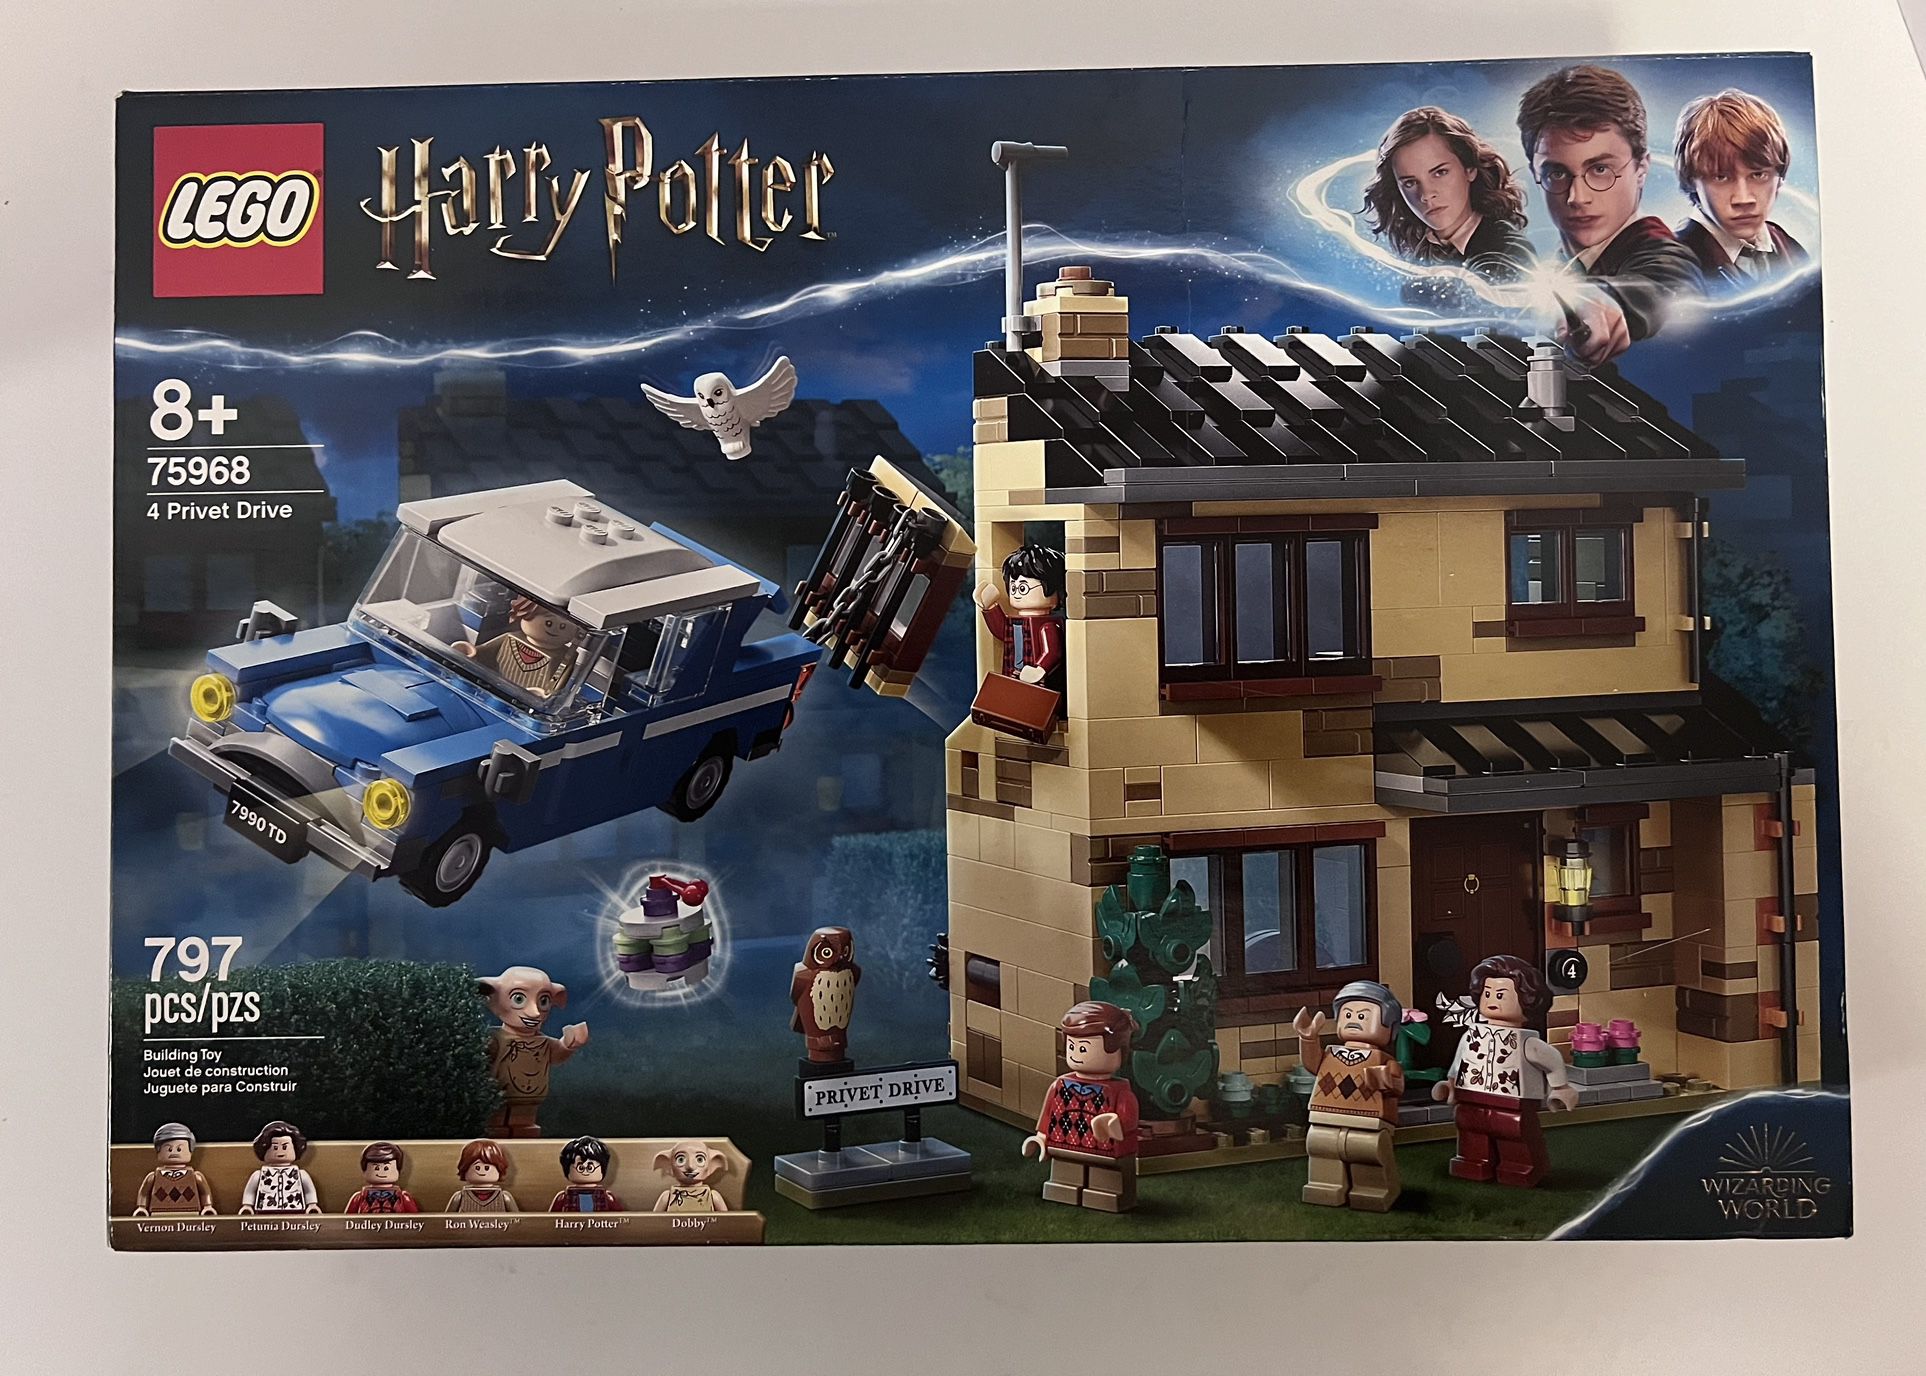 Lego Harry Potter 75968 4 Privet Drive NIB Damaged Box But Bags Are Unopened